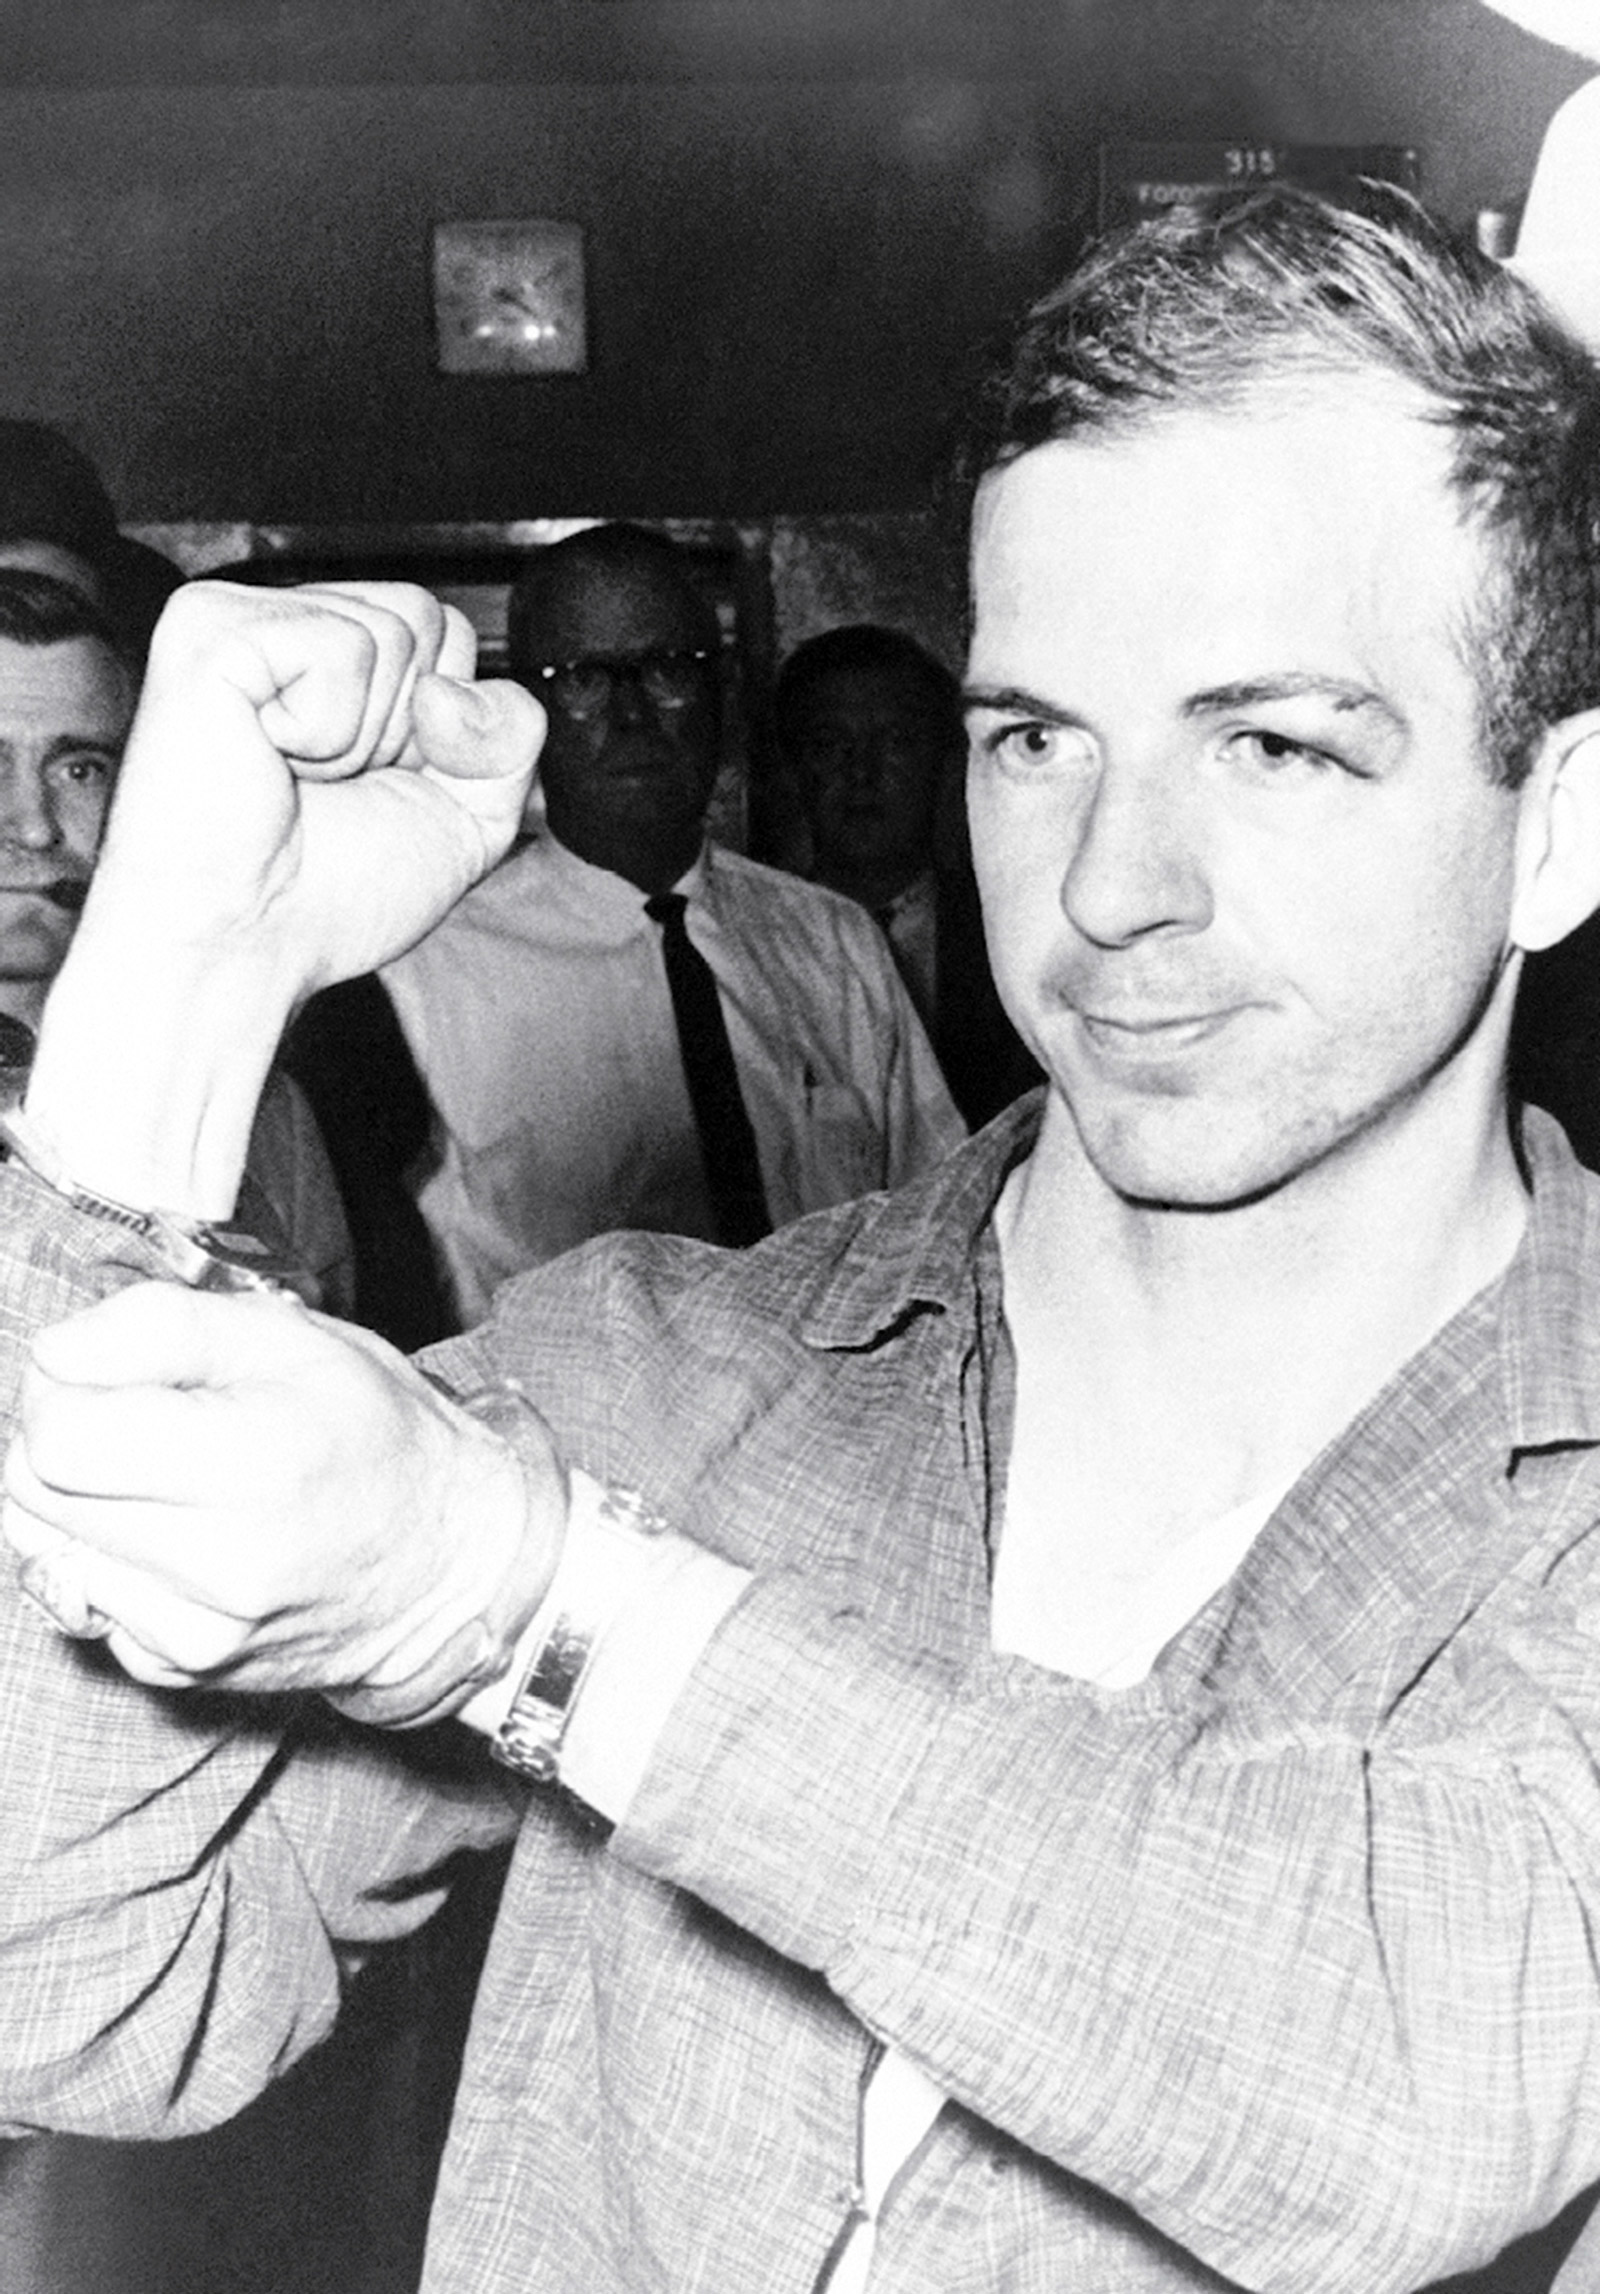 Lee Harvey Oswald shortly after the assassination. Photo AP.